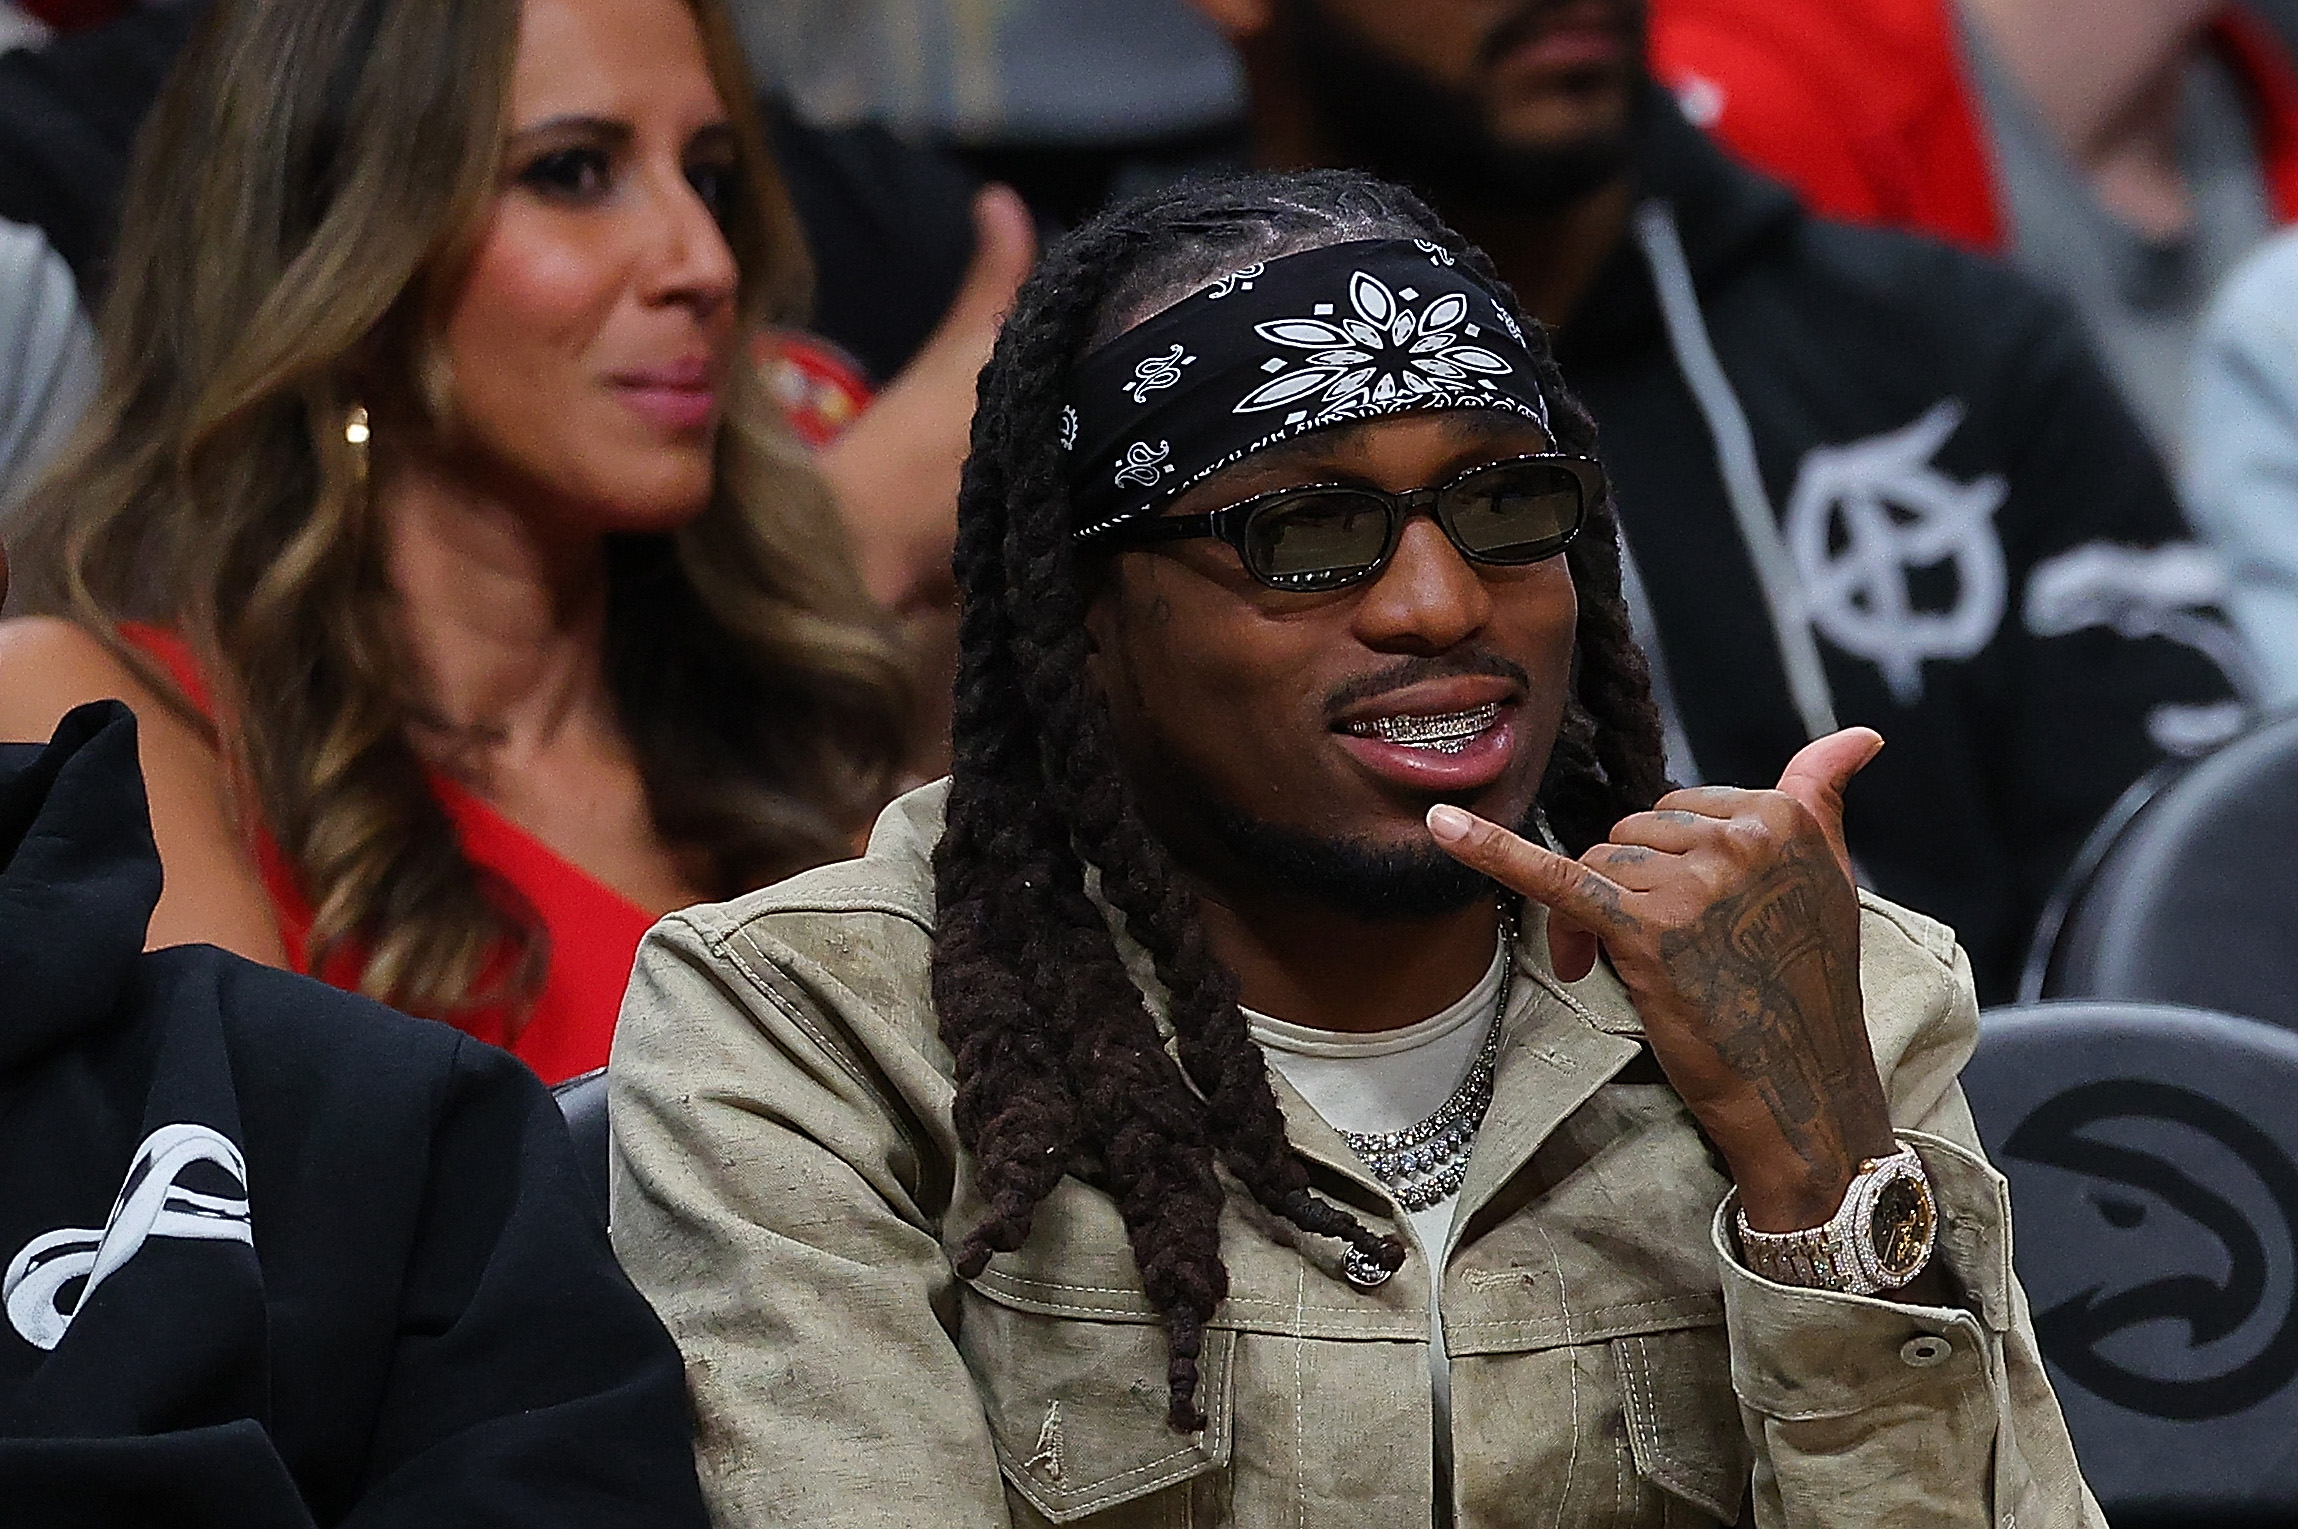 Quavo Sends Shots Back At Chris Brown On New Song "Tender"